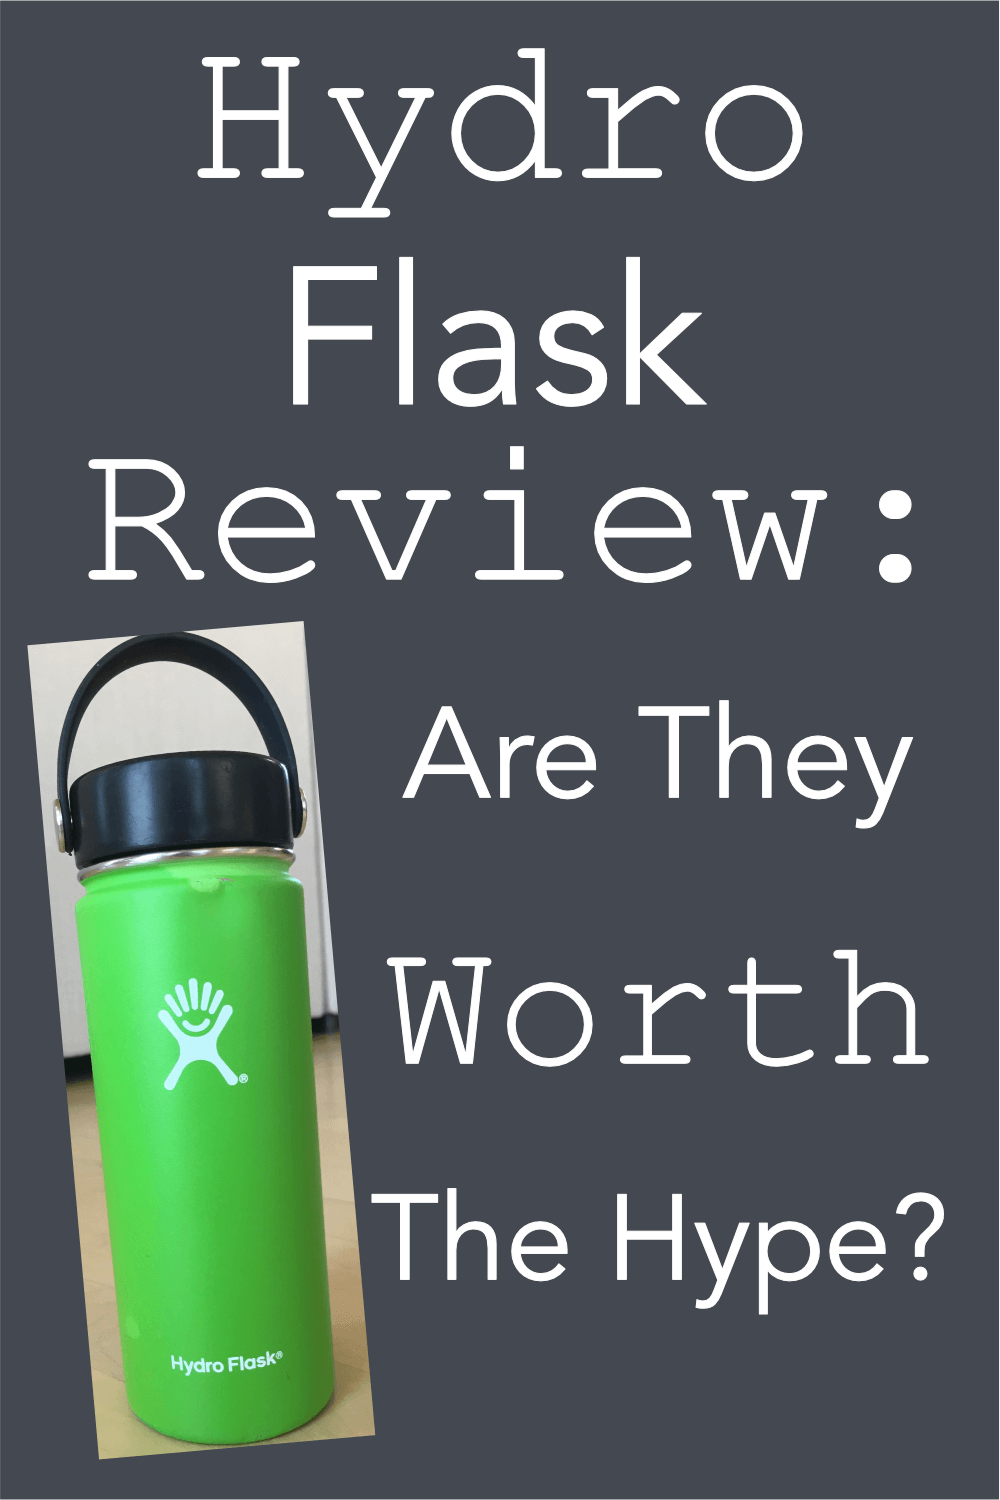 Hydro Flasks are incredibly popular. The question is, are they actually worth the hype?